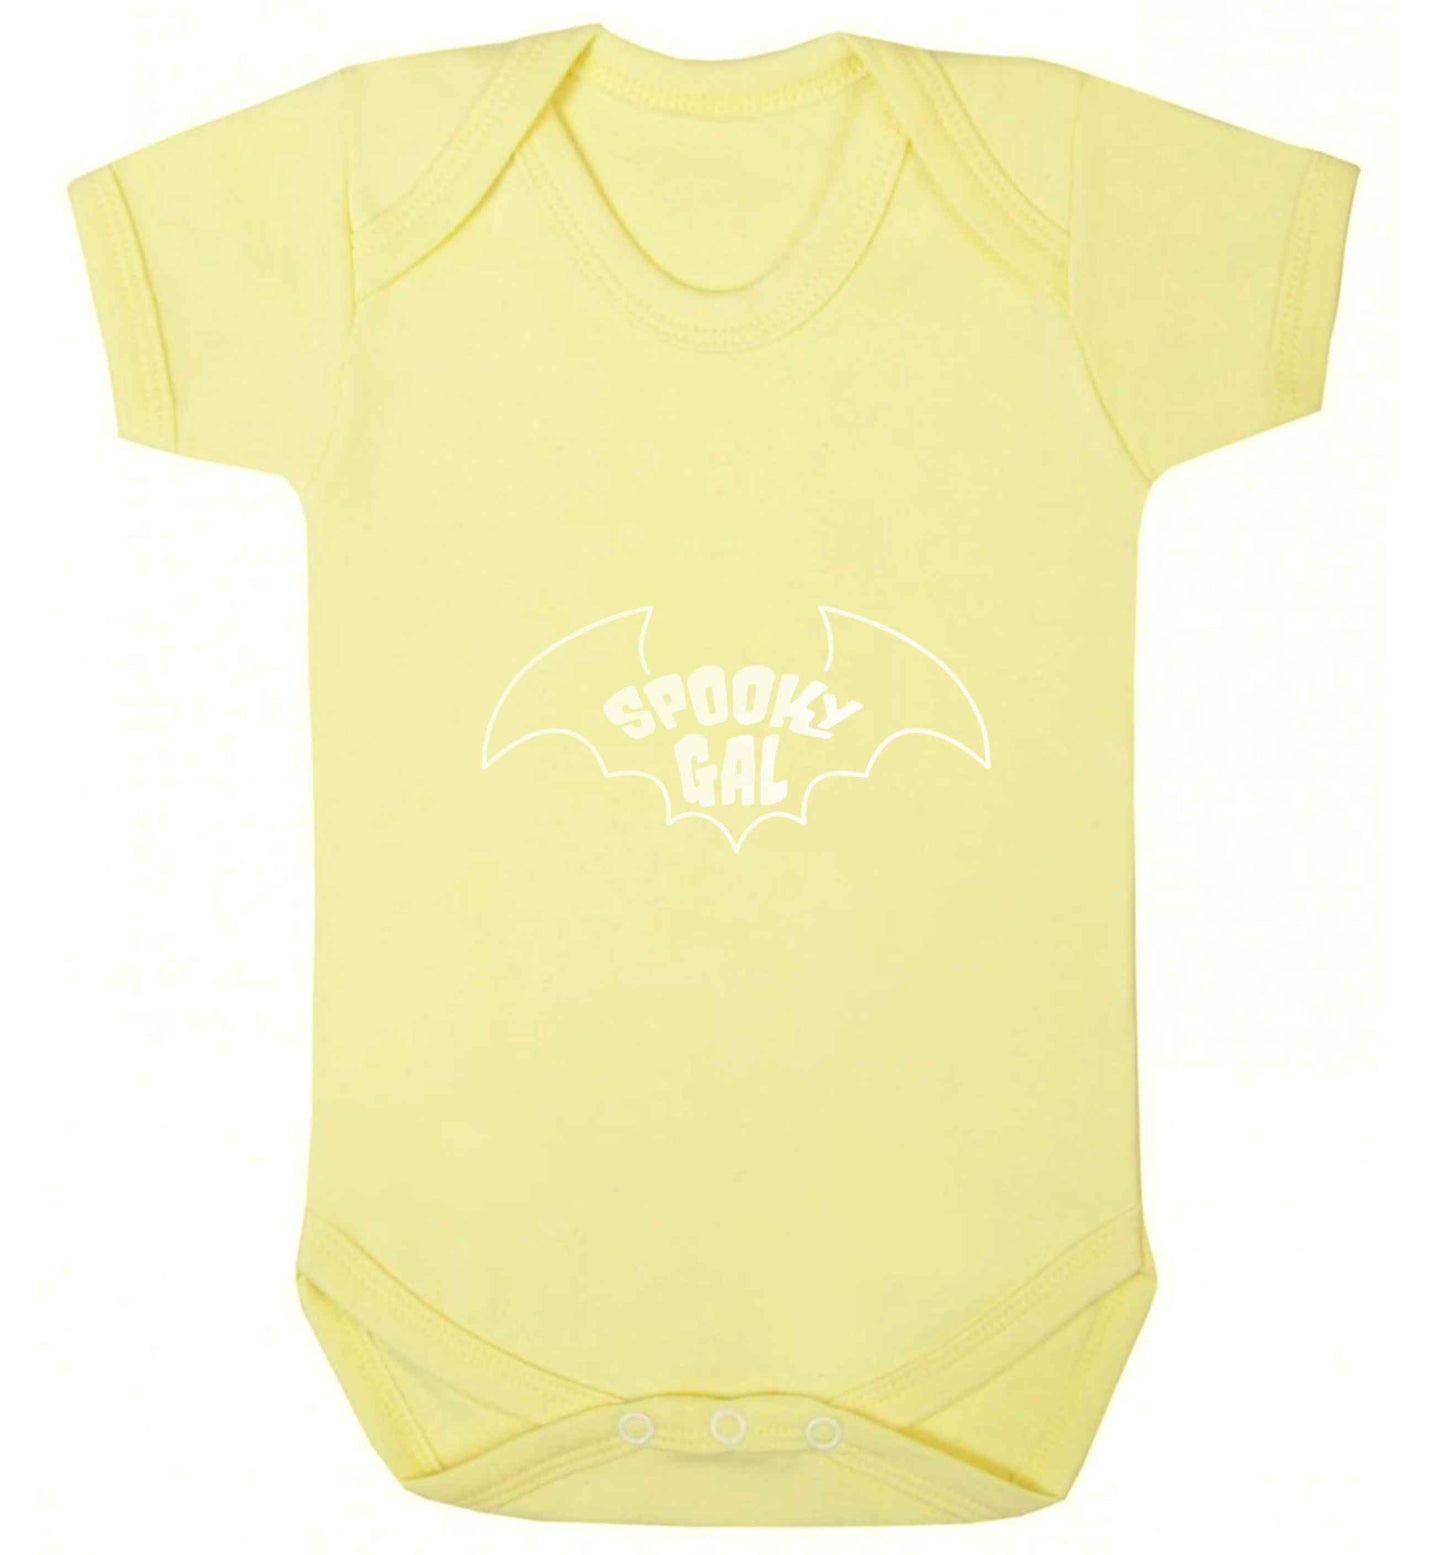 Spooky gal Kit baby vest pale yellow 18-24 months